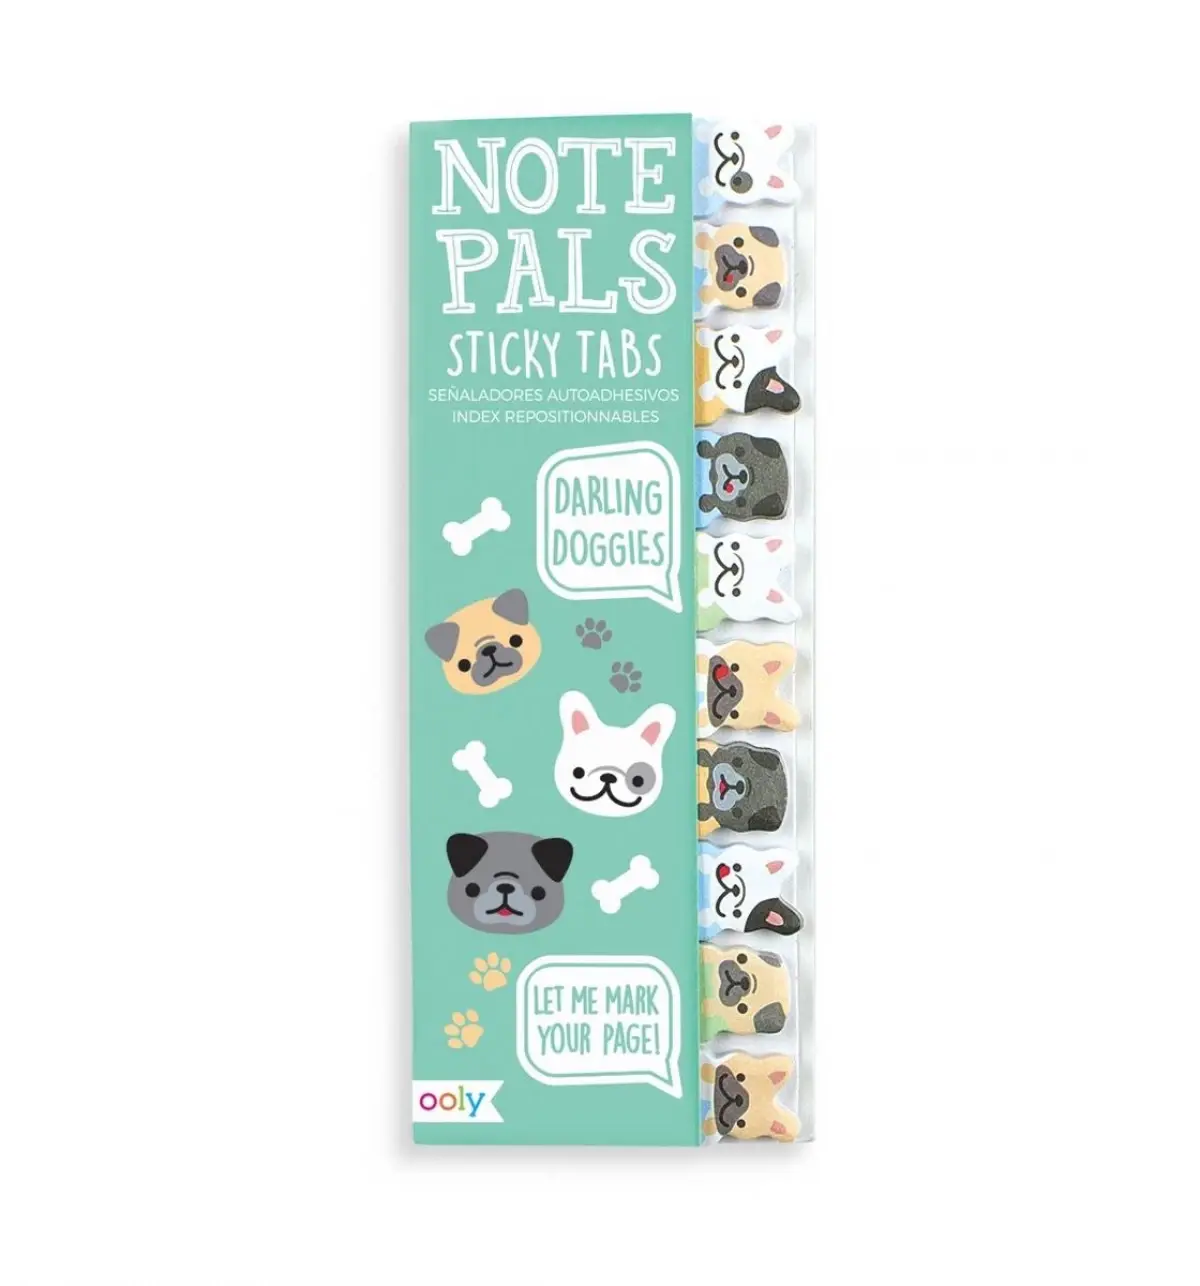 OOLY Note pals sticky tabs Darling Doggies Multicolour 6Y+